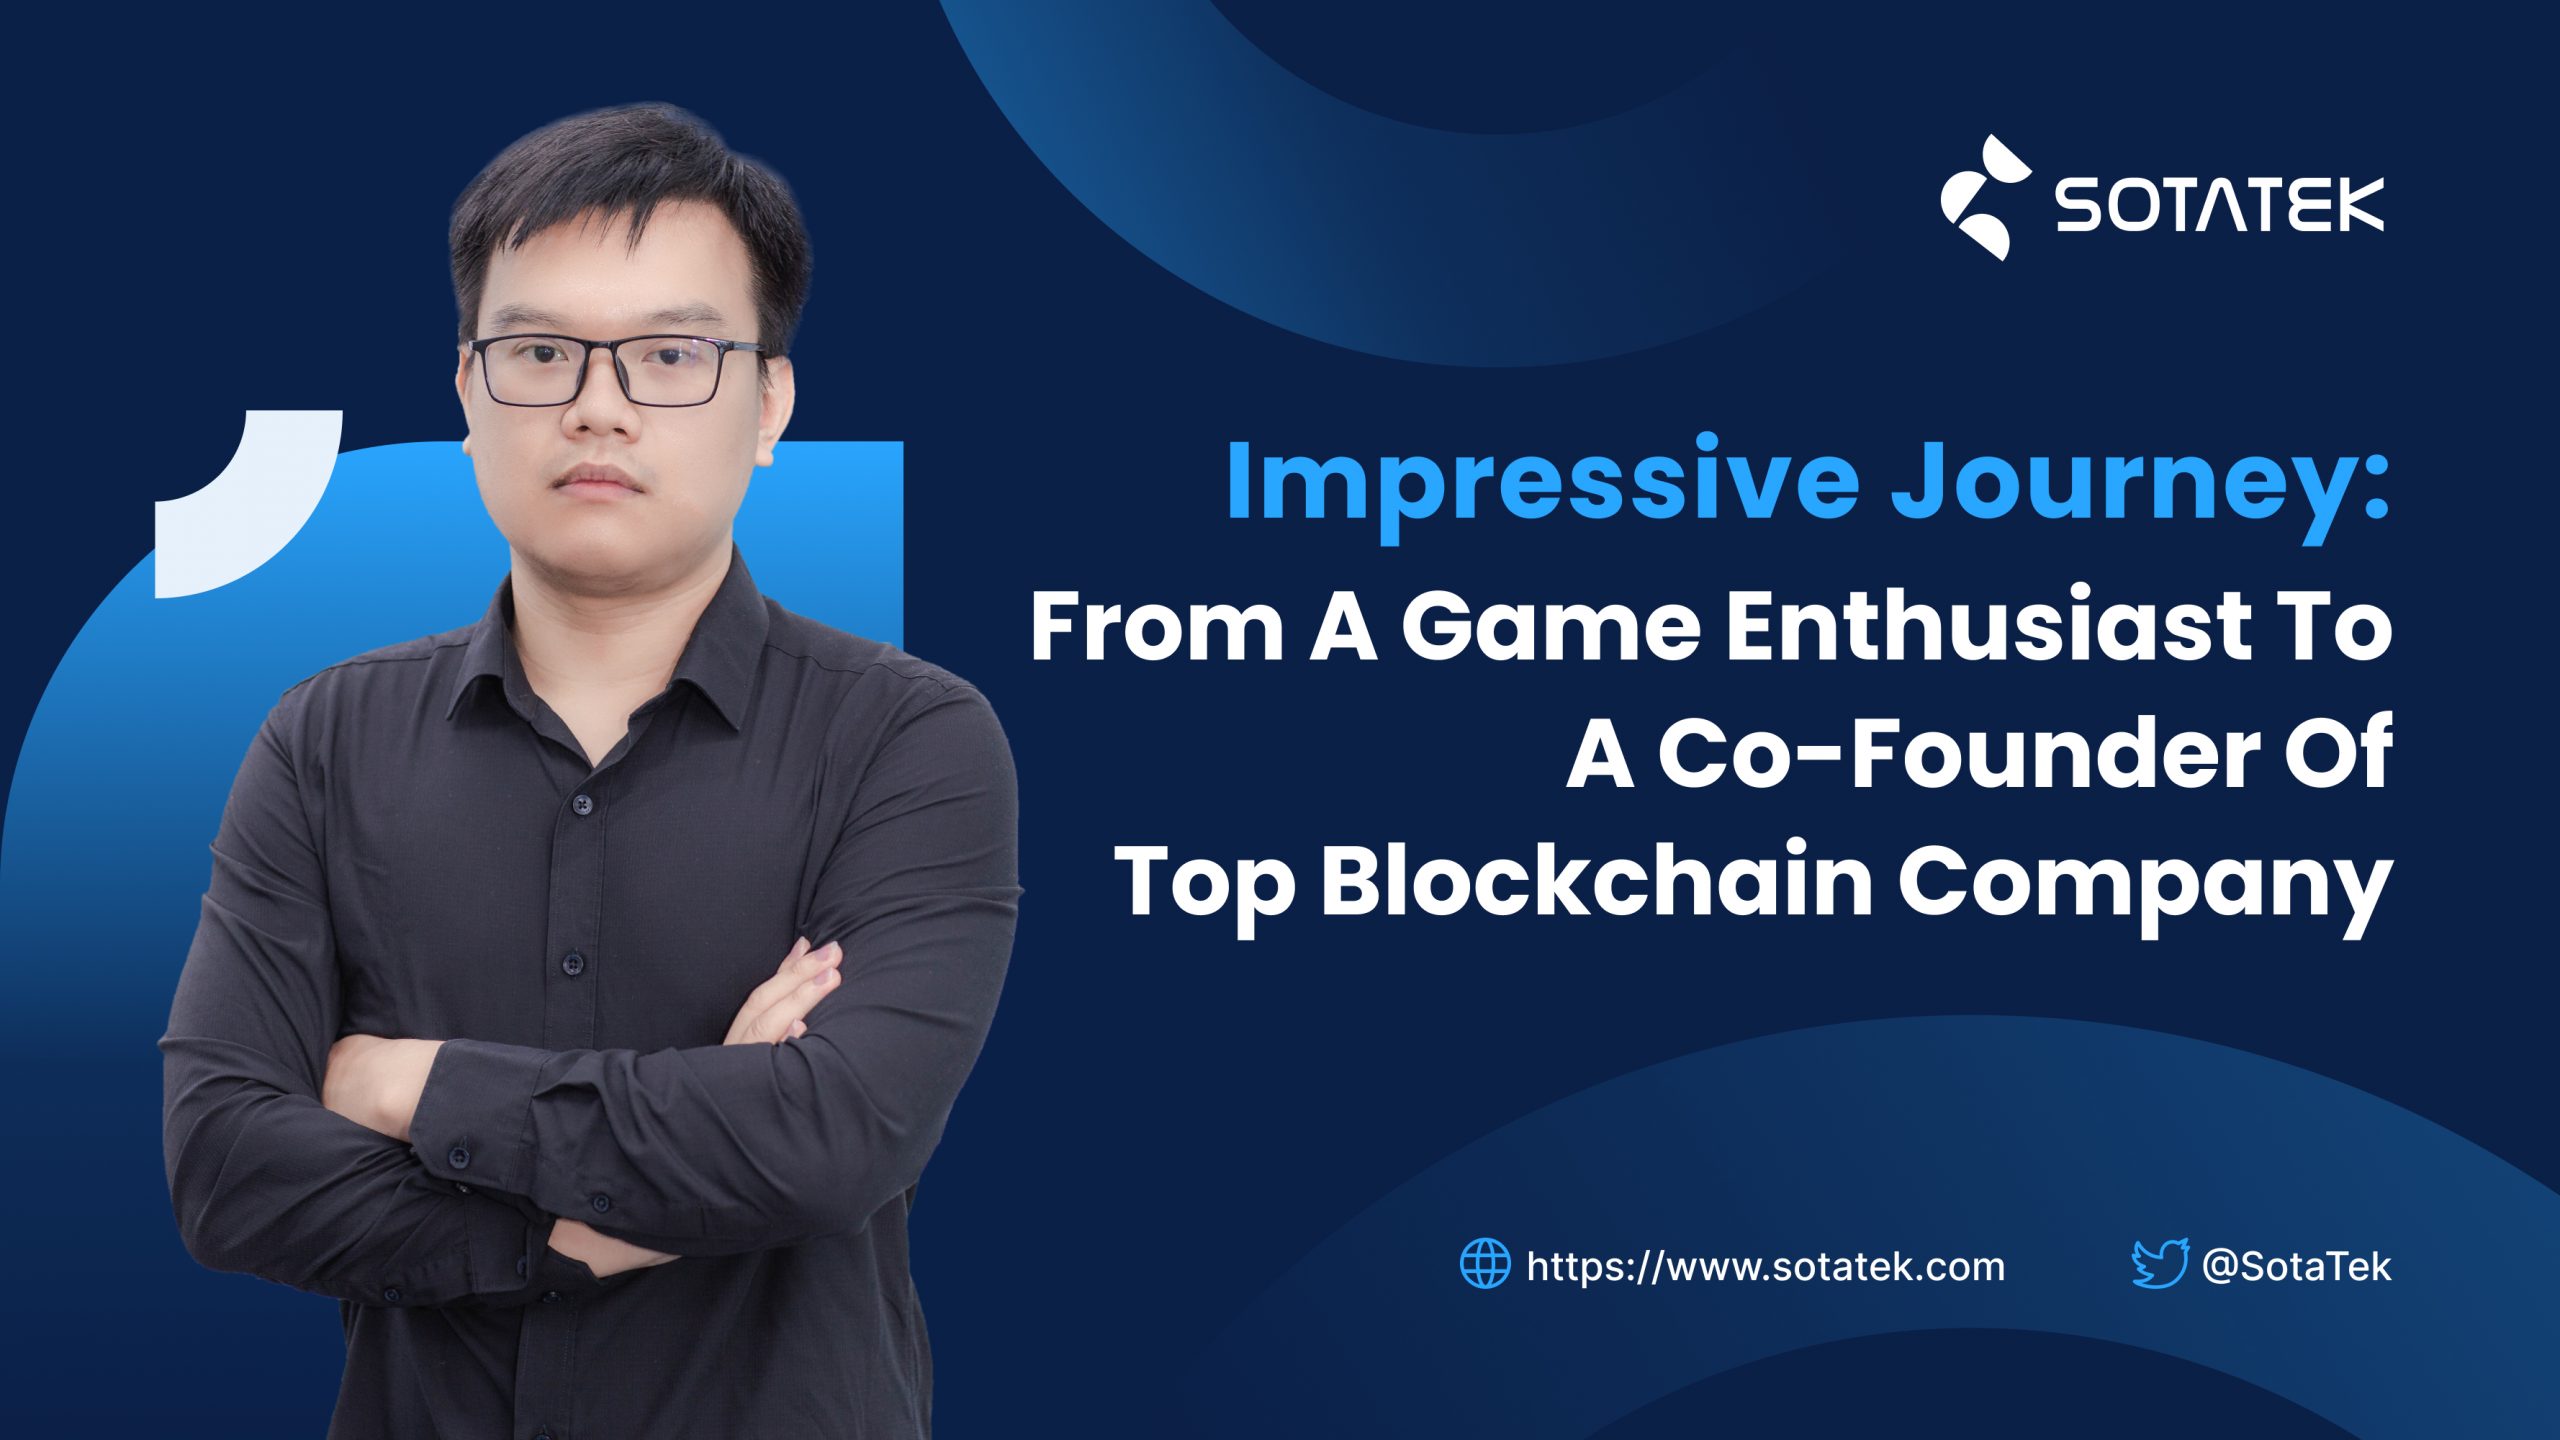 Impressive Journey: From A Game Enthusiast To A Co-Founder of Top Blockchain Development Company